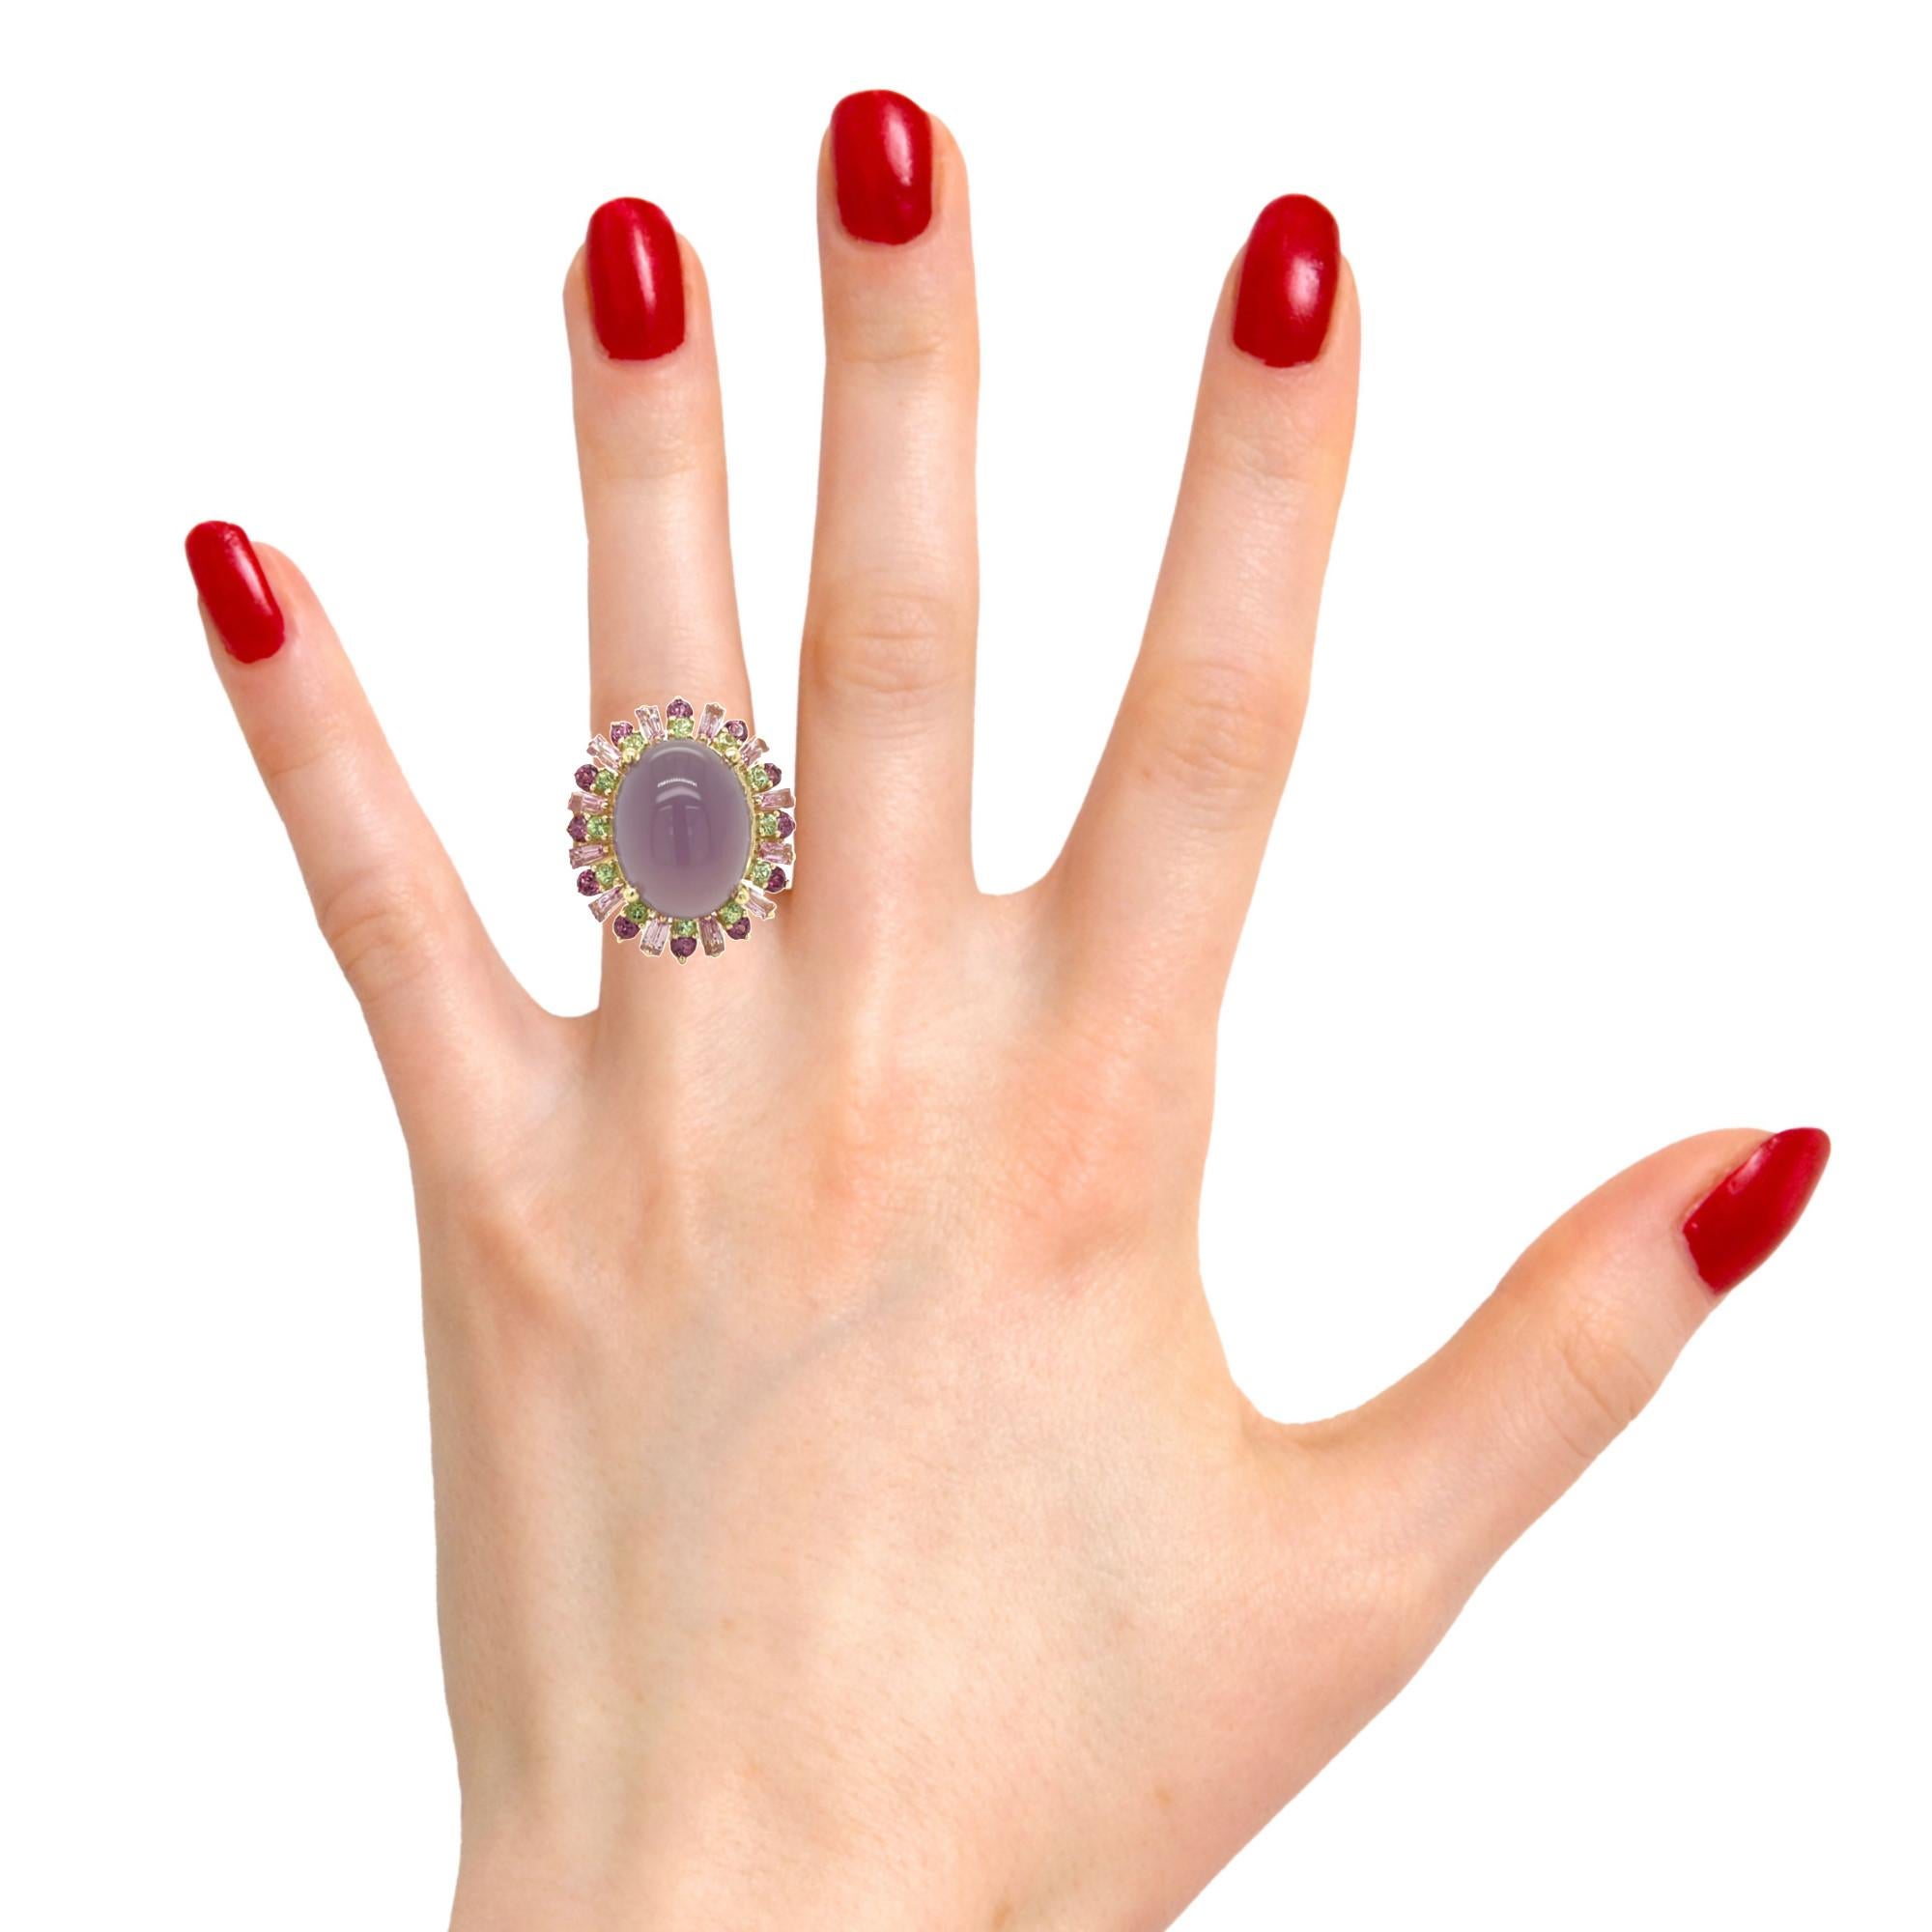 Lavender Chalcedony, Pink Tourmaline, Rhodolite Garnet and Peridot Cocktail Ring For Sale 4